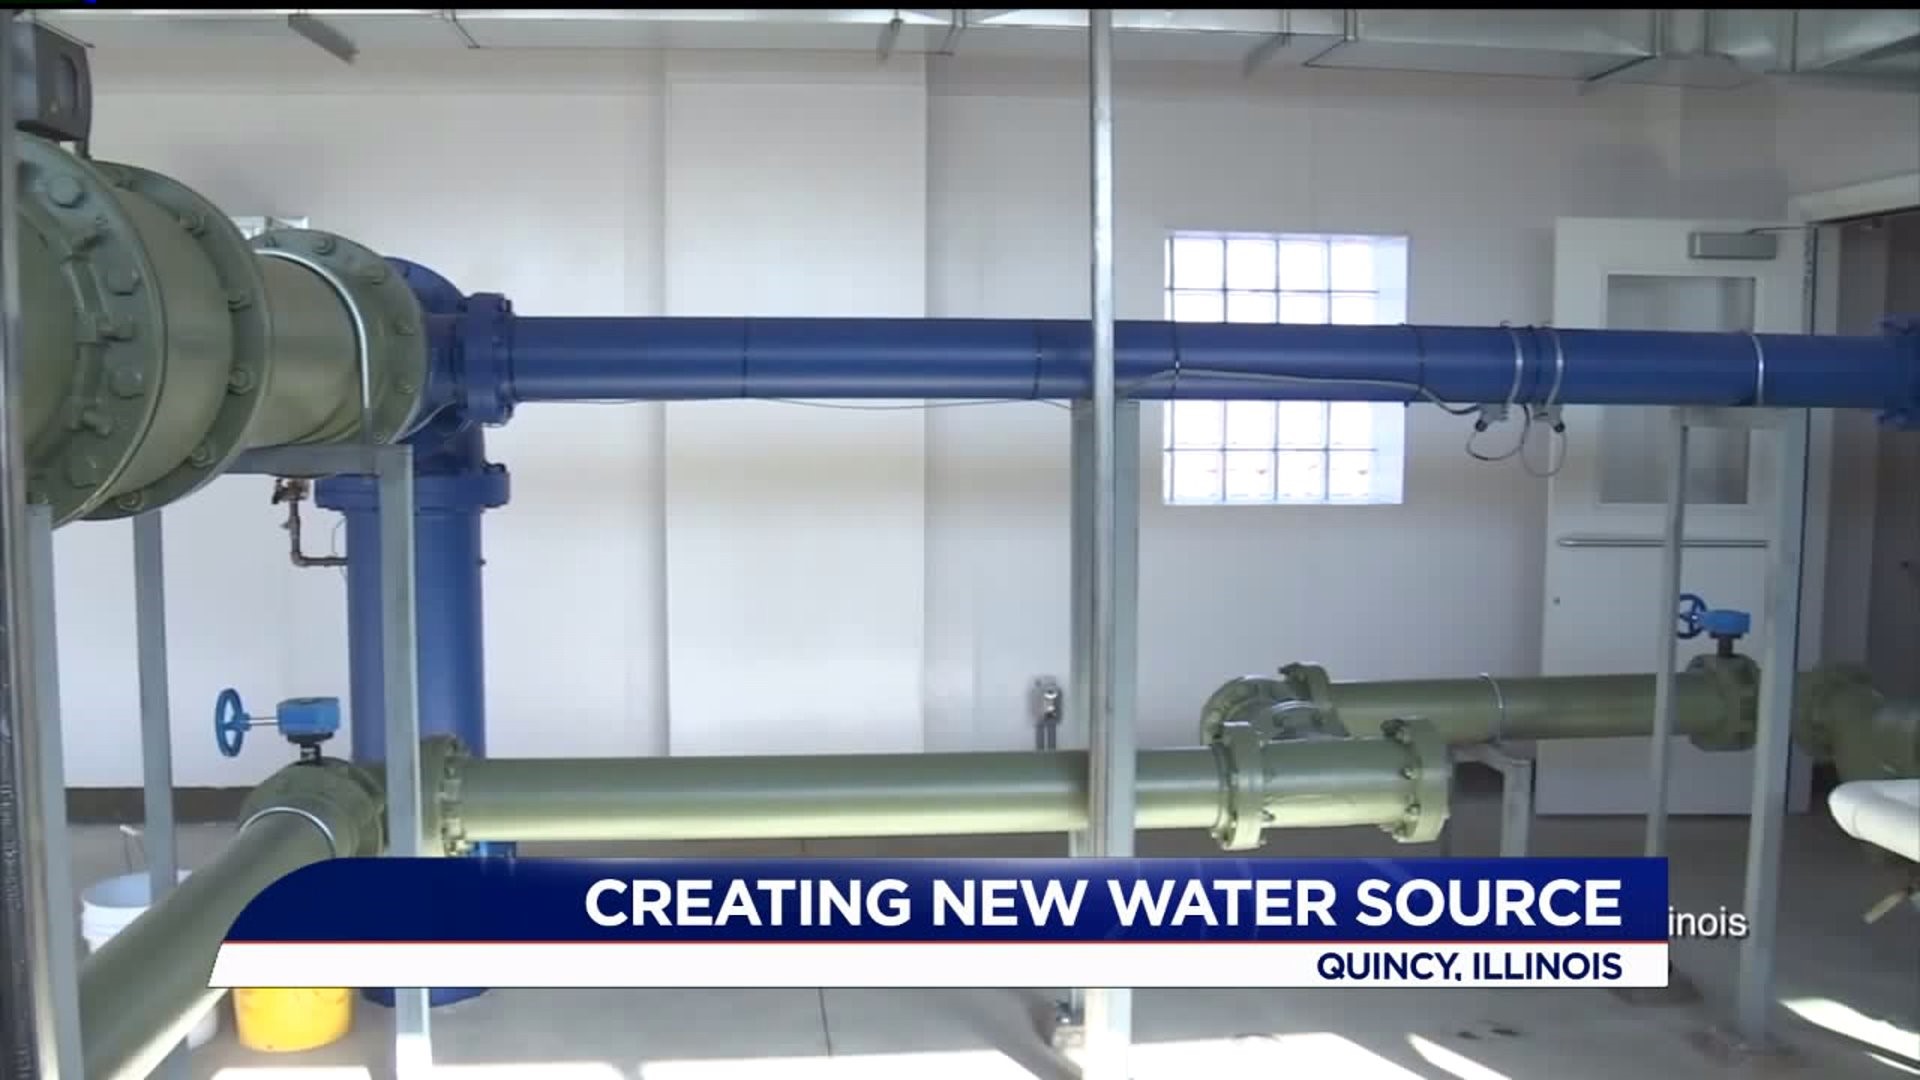 Rauner announces new water well for Quincy